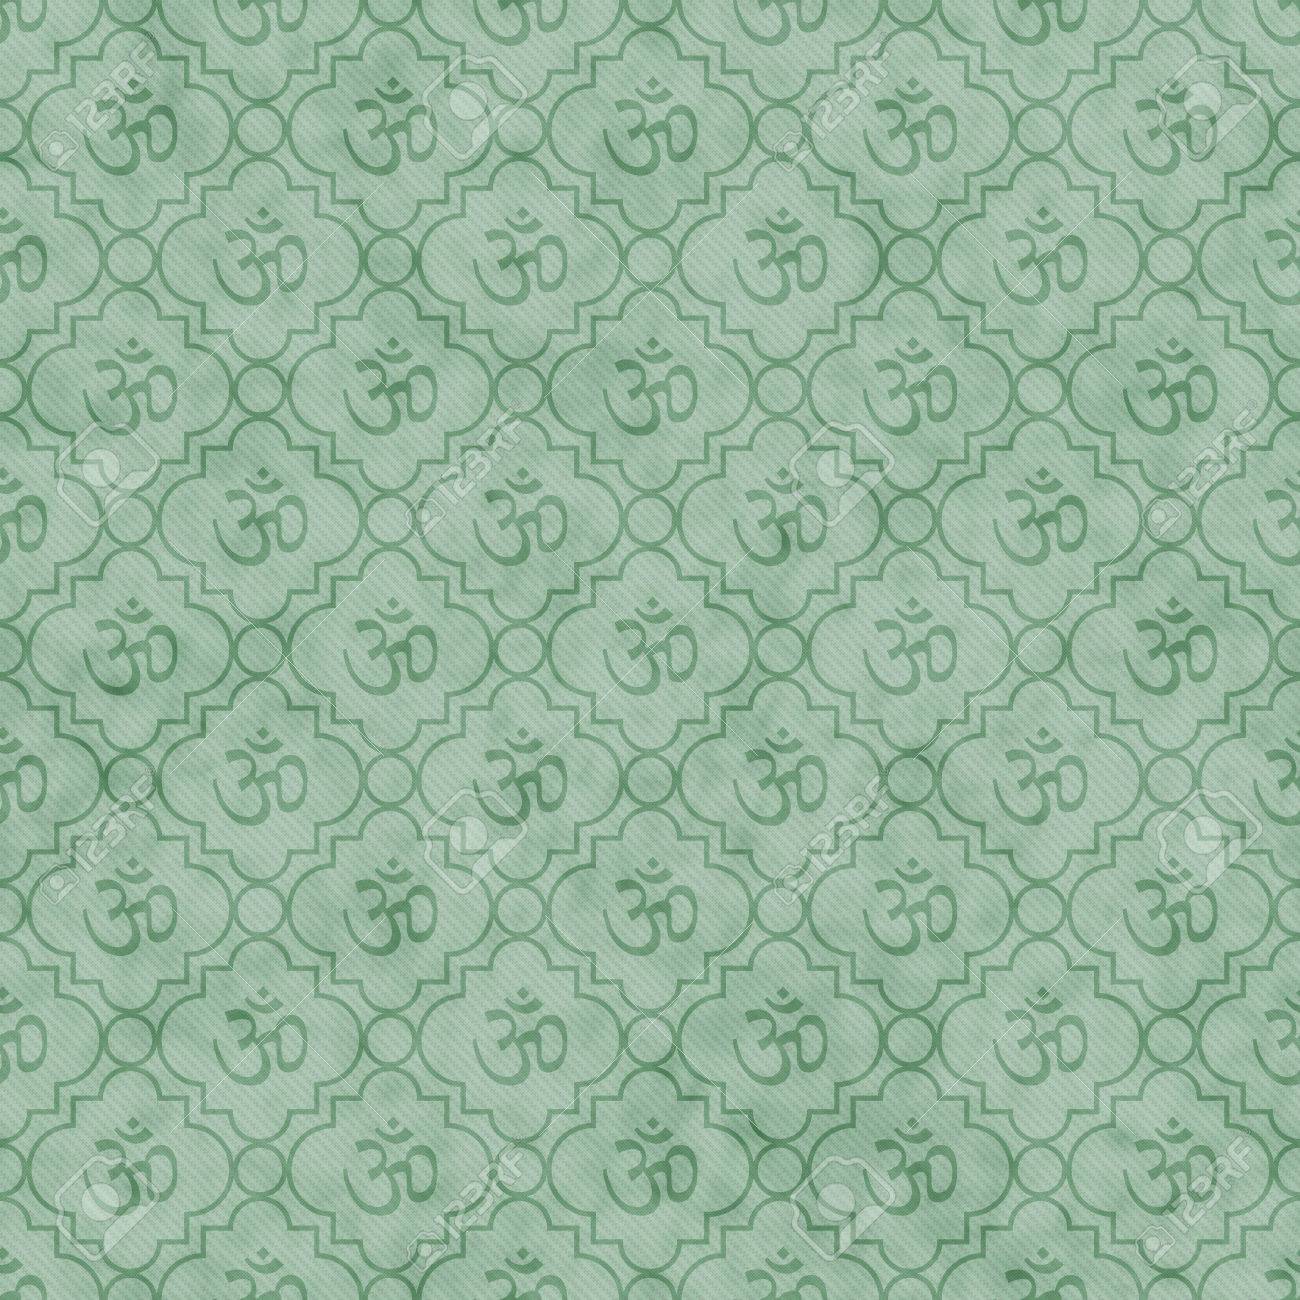 Green Aum Hindu Symbol Tile Pattern Repeat Background That Is